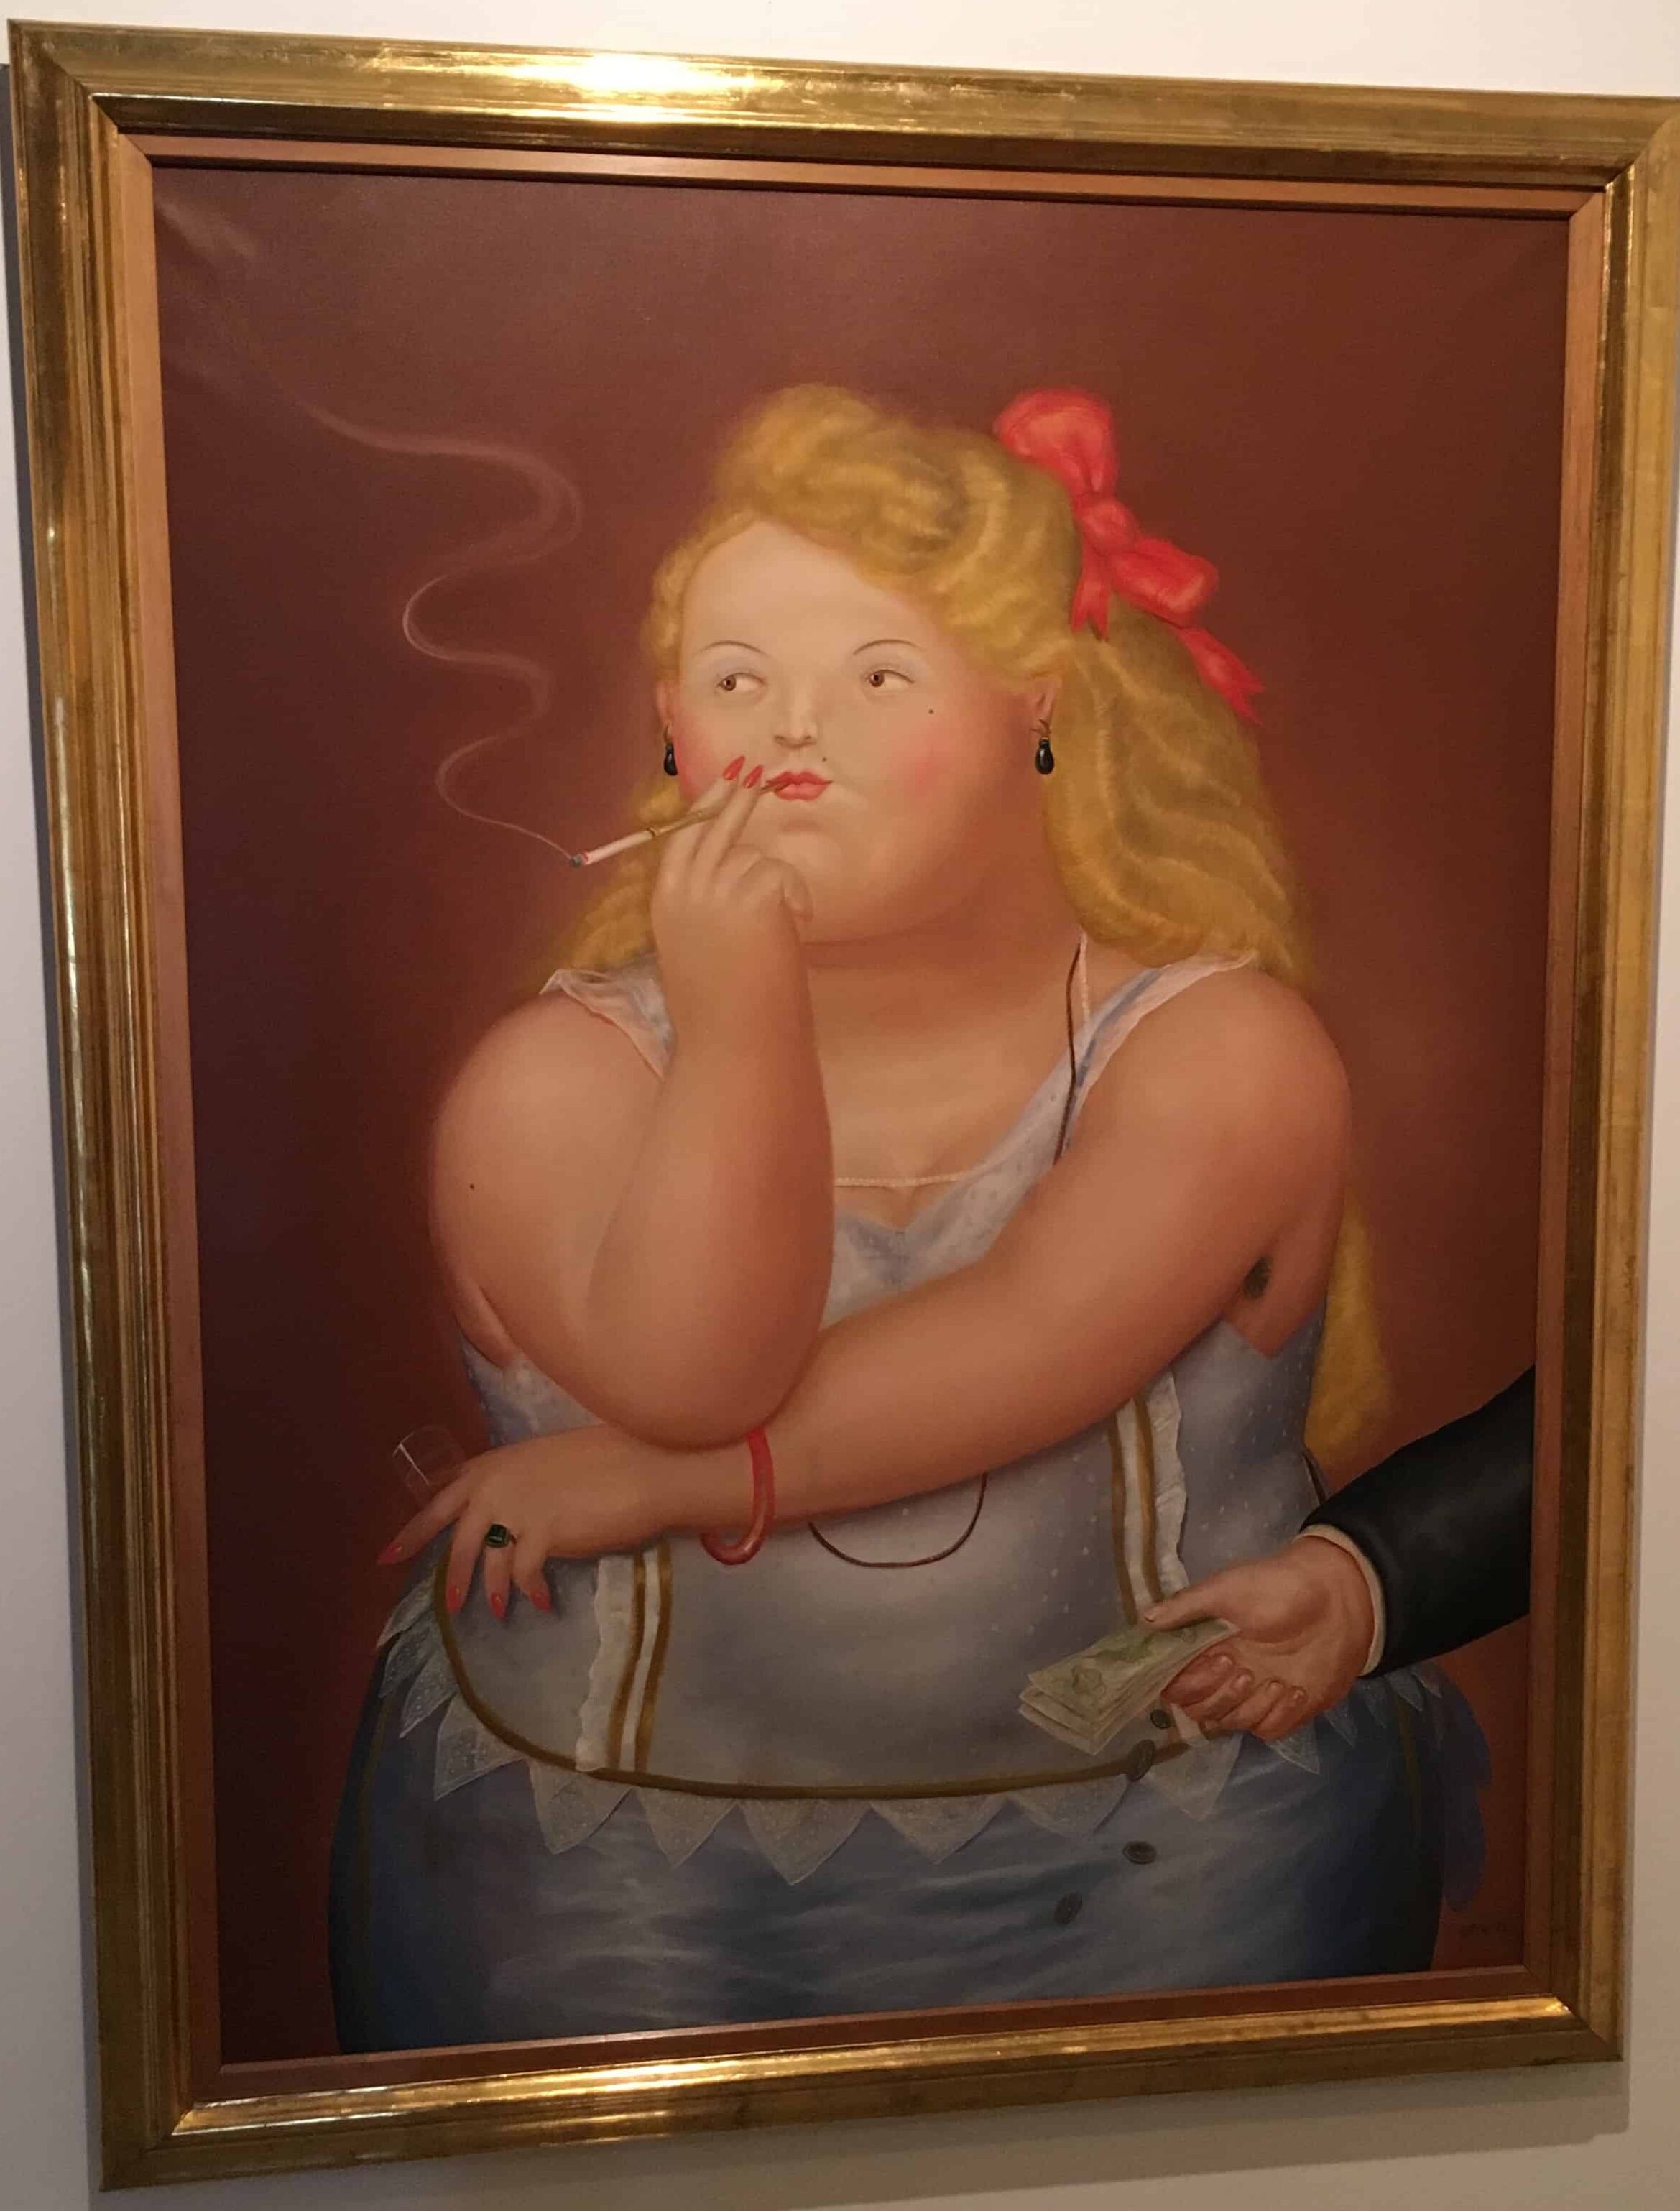 A prostitute by Botero at the Antioquia Museum in Medellín, Colombia